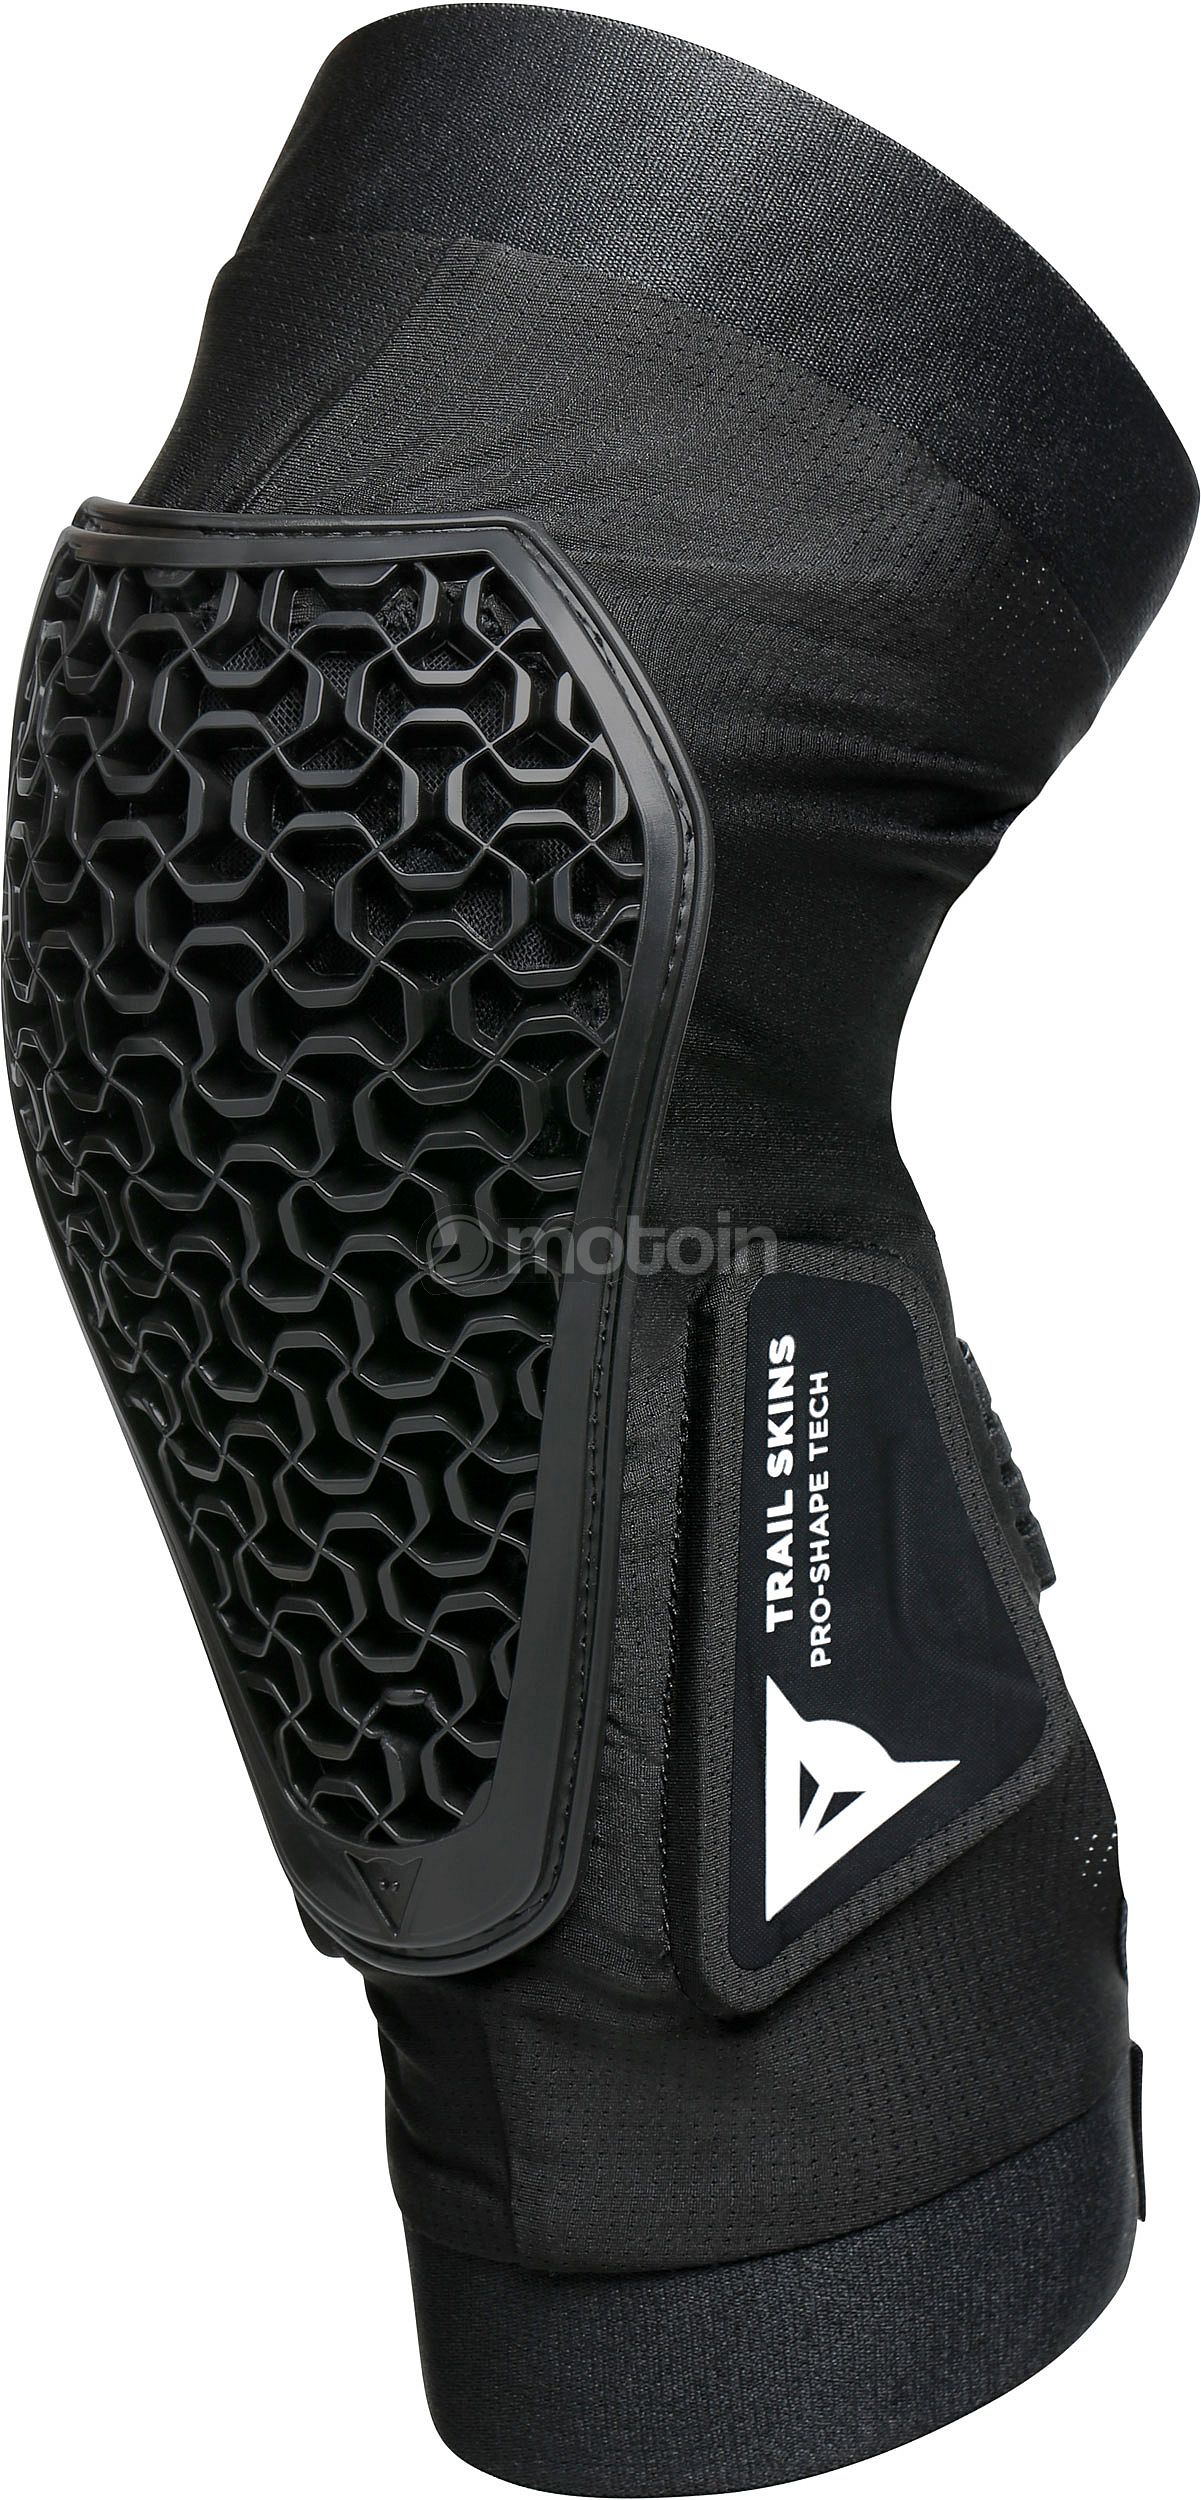 Dainese Trail Skins Pro, knee protector